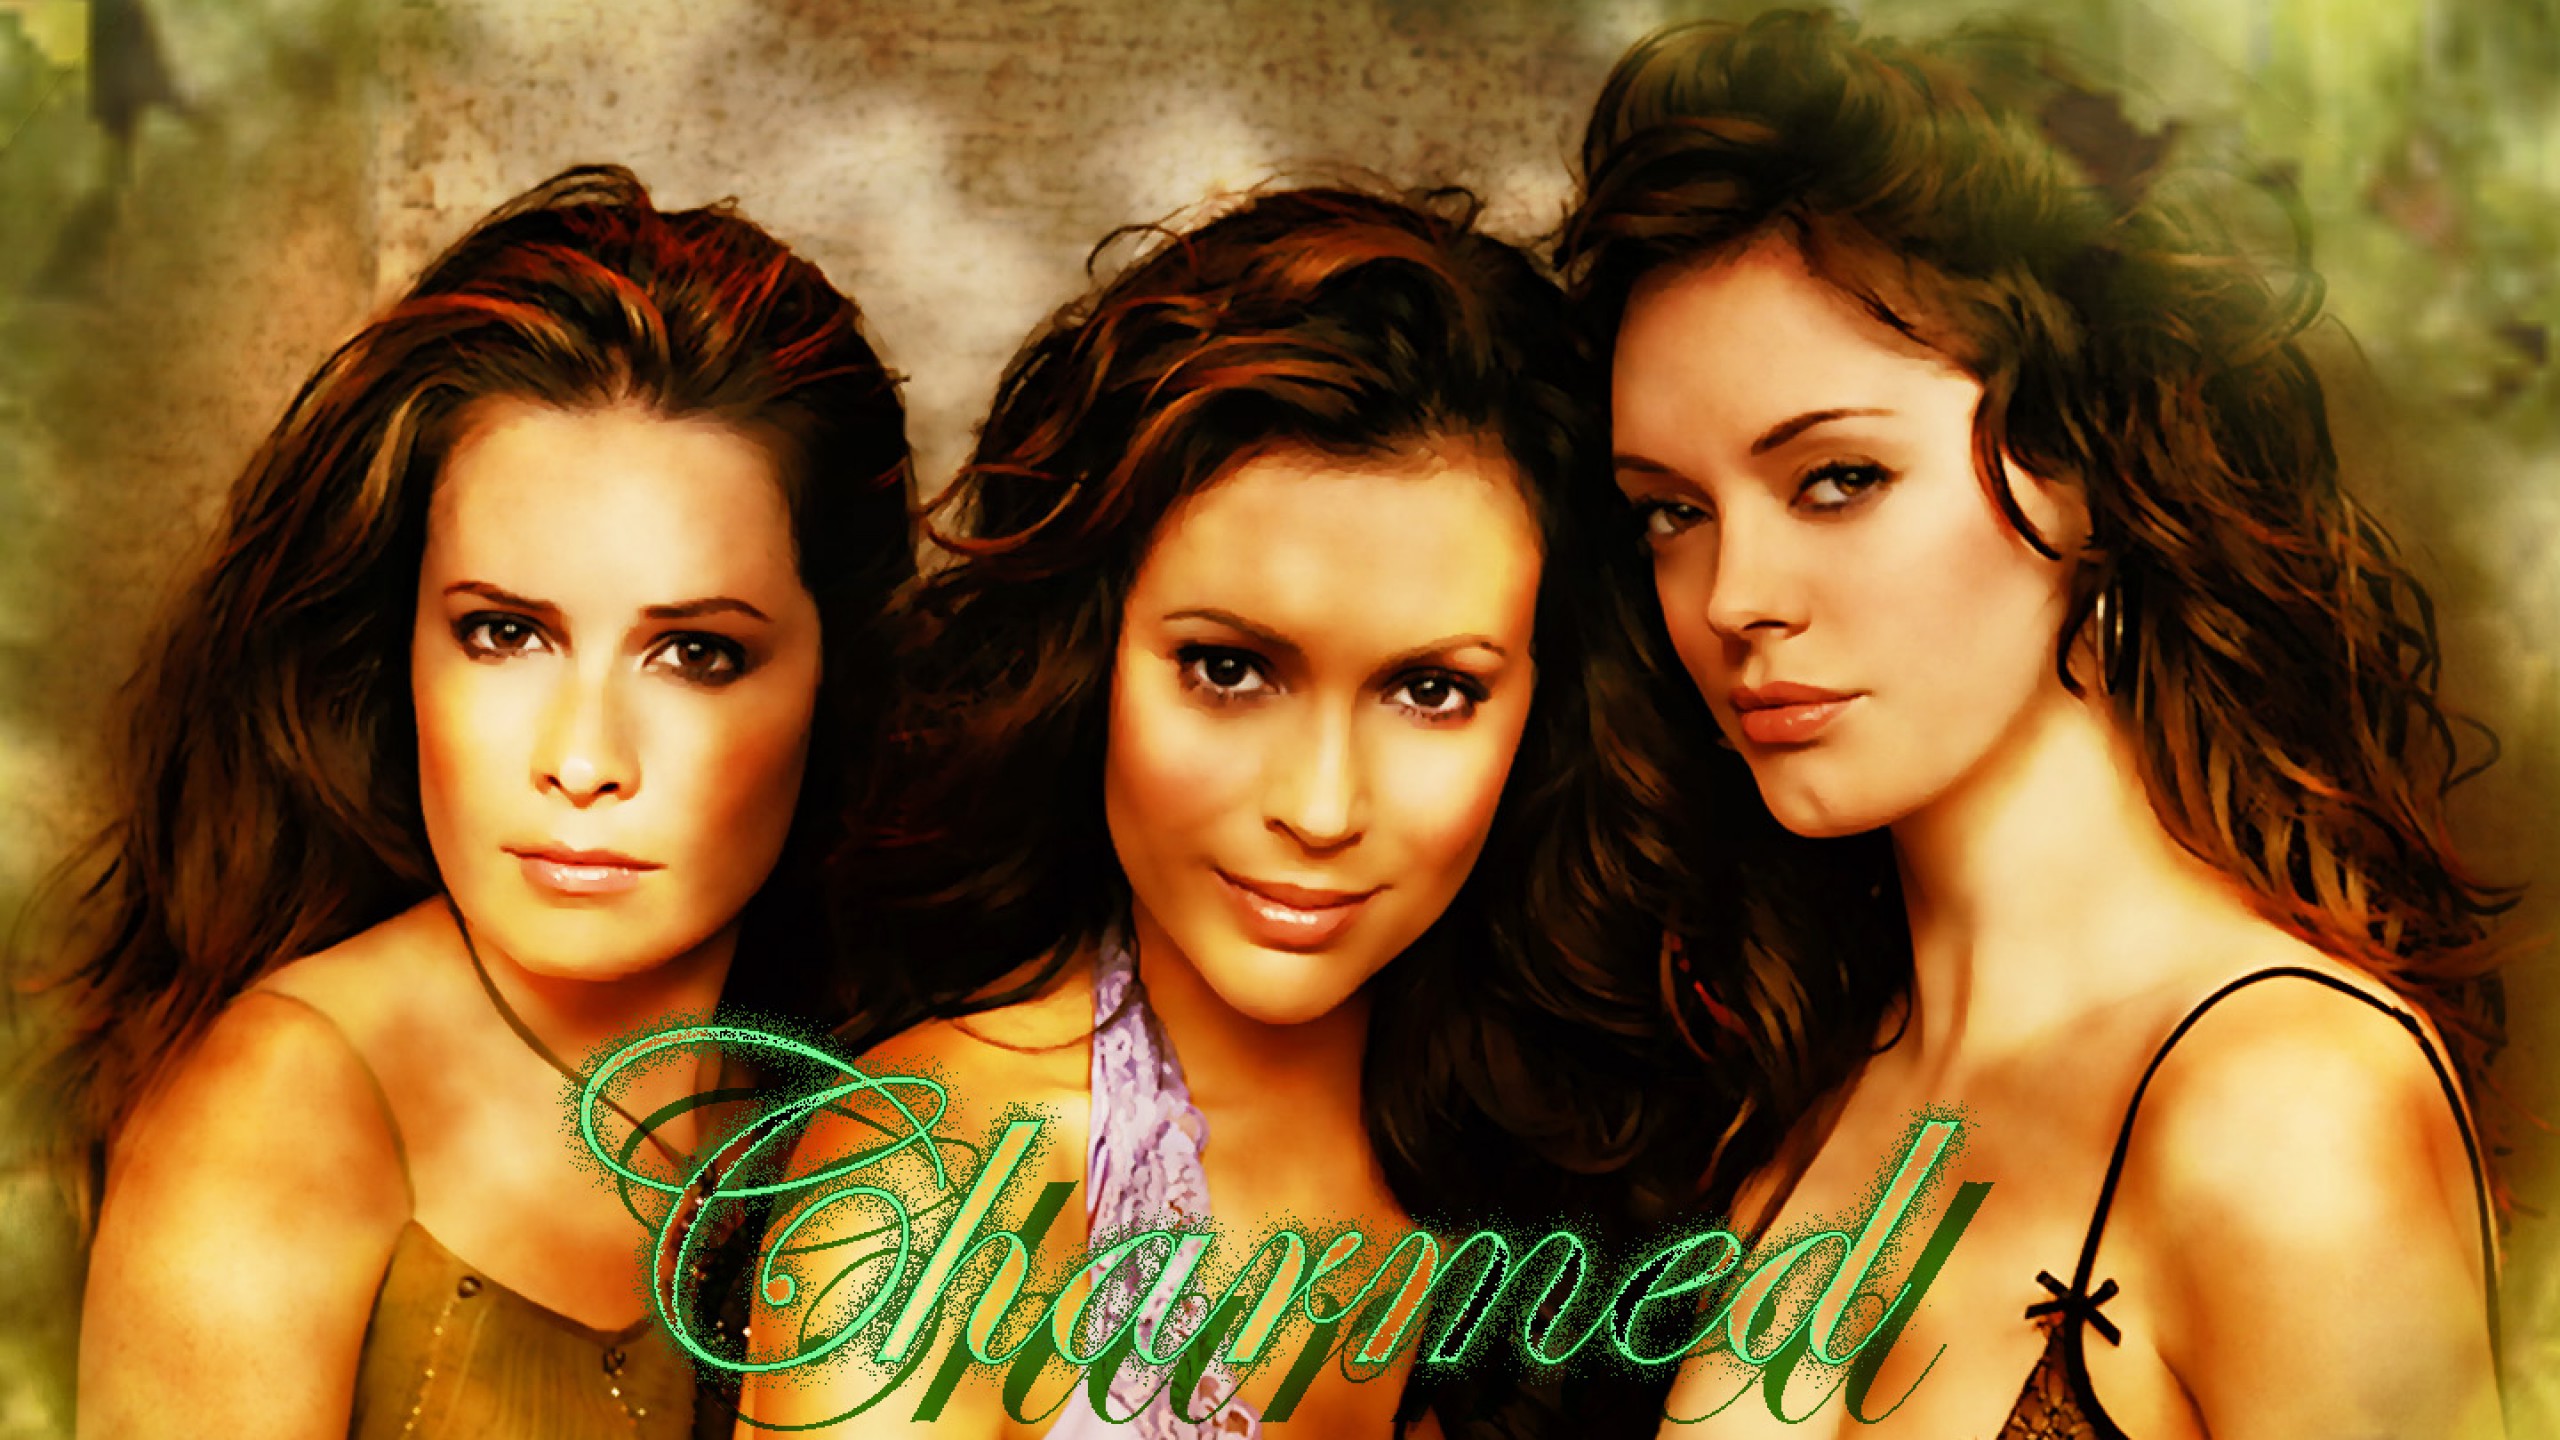 TV Show Charmed (1998) HD Wallpaper | Background Image